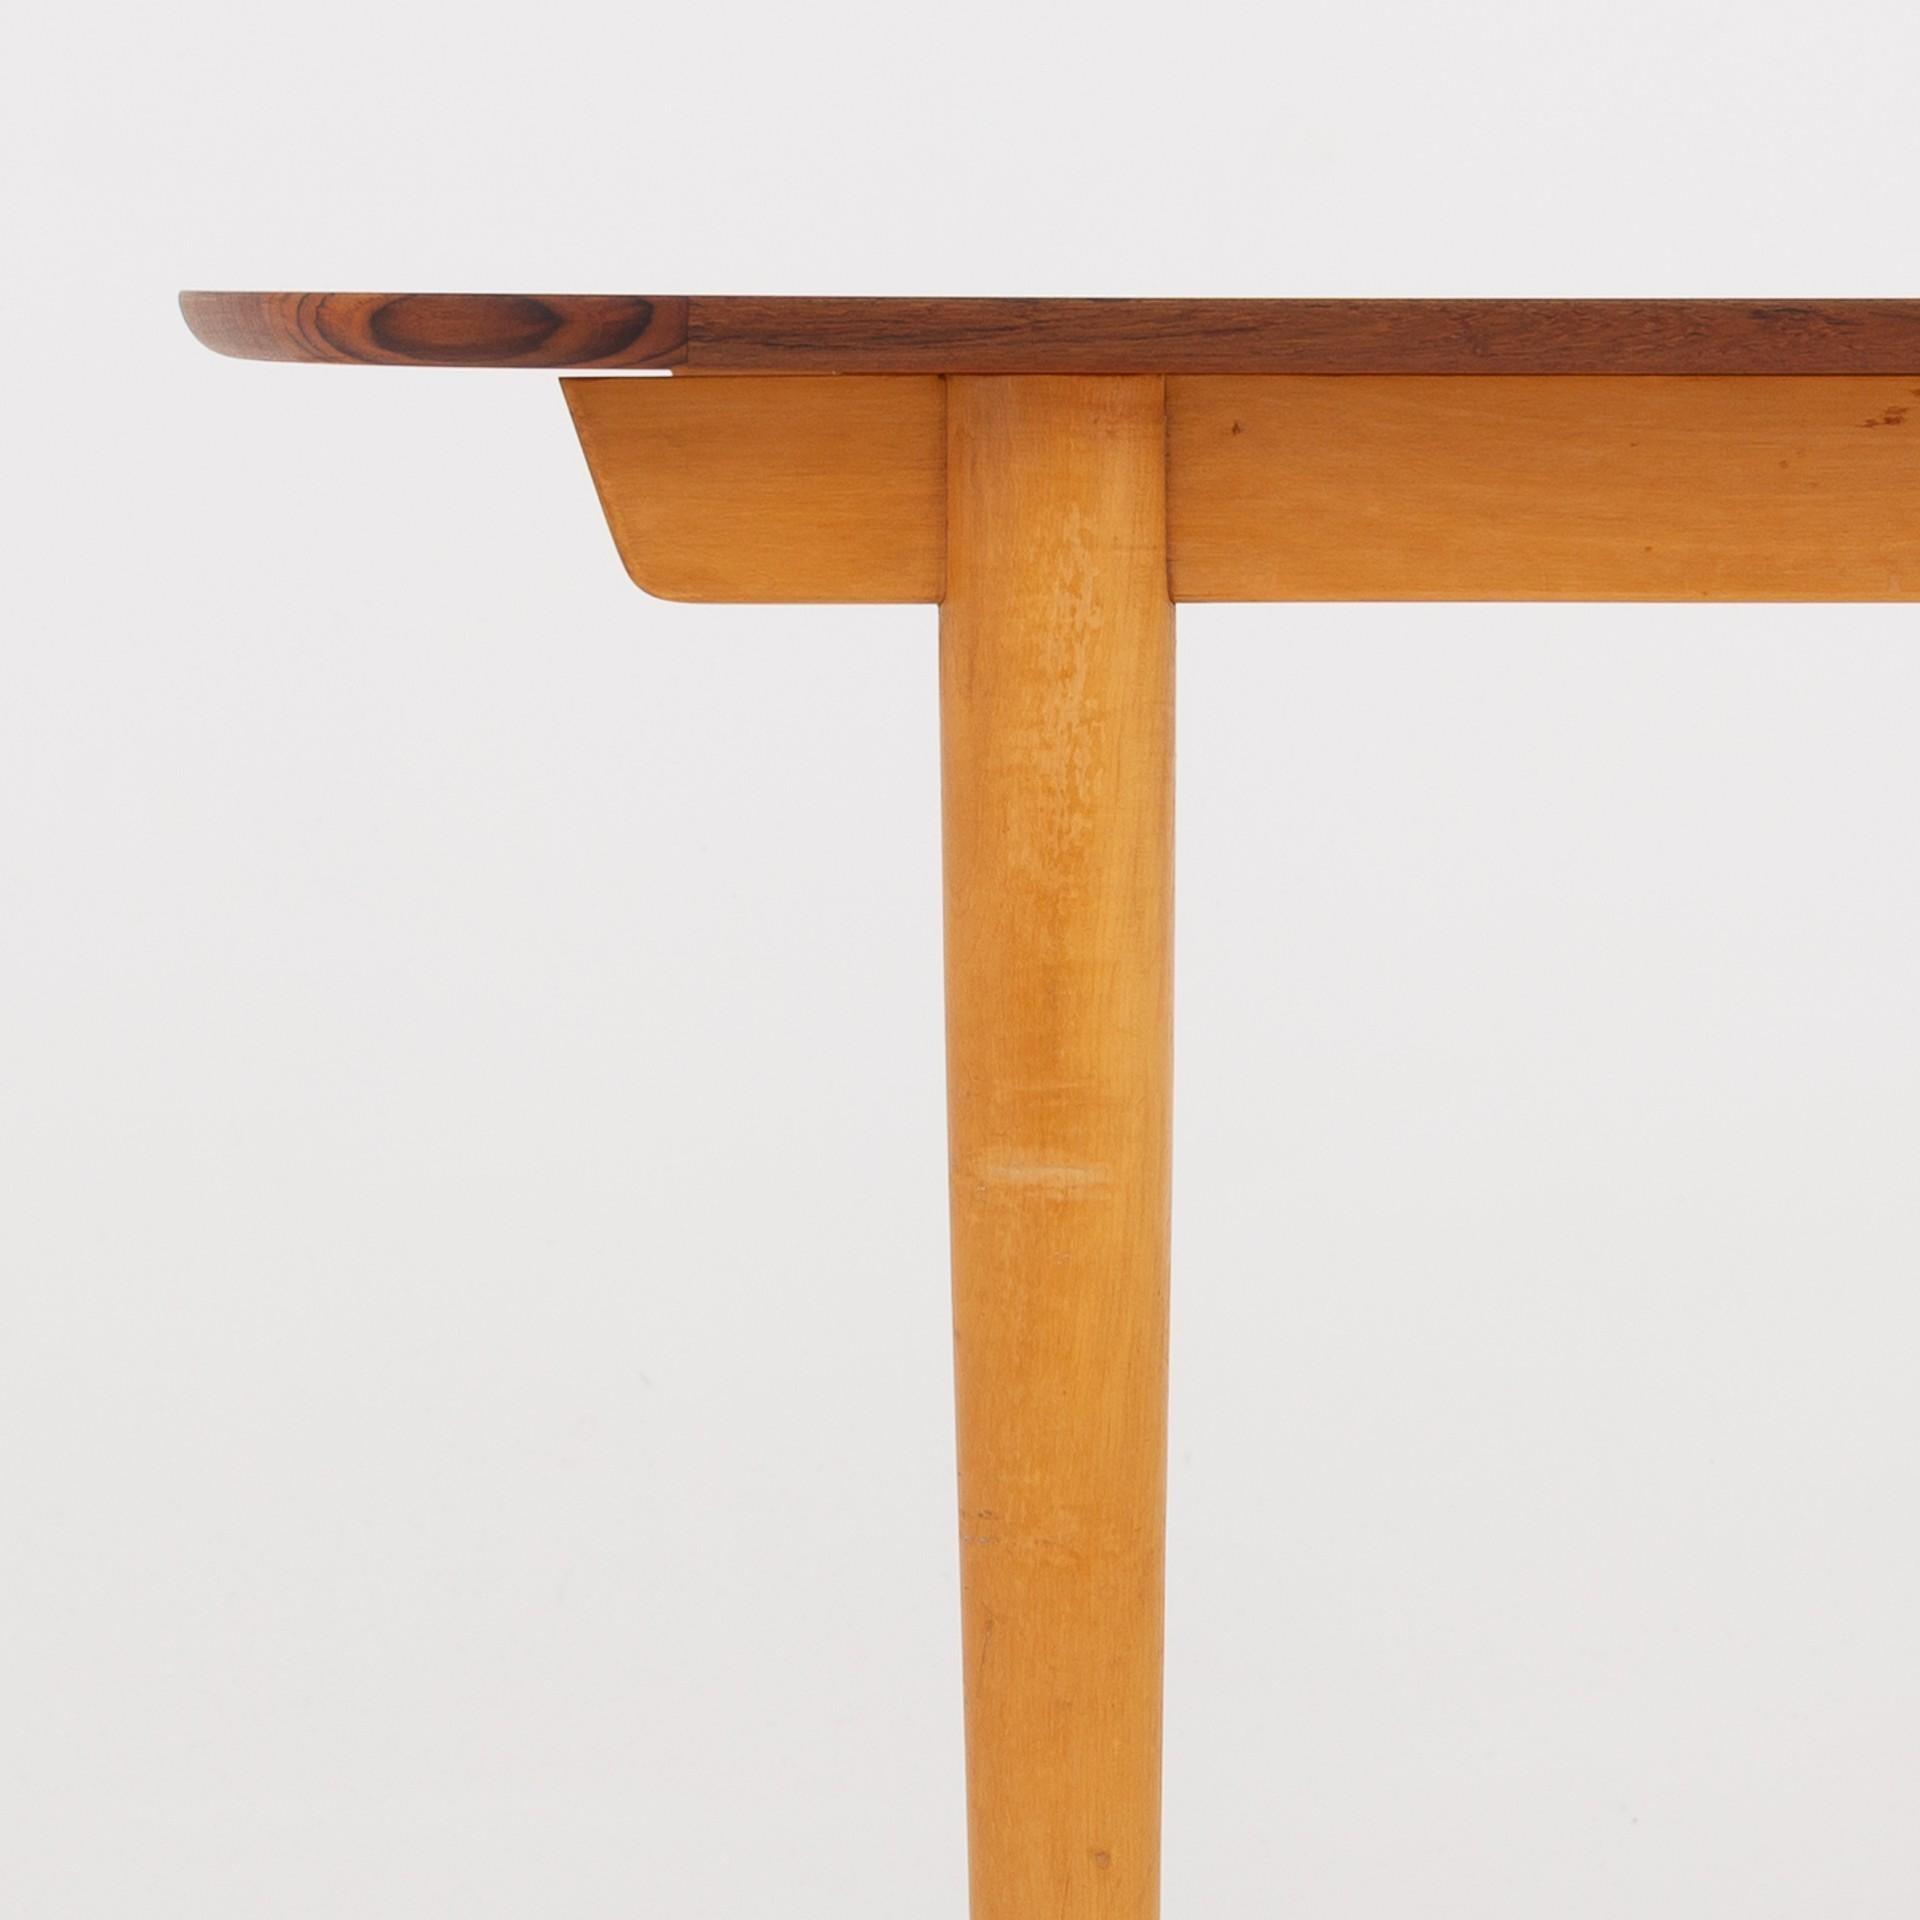 Dining table with extension, table top in teak, legs in beech and shoes in teak. Storage for extension underneath table top. Two leaves of 41 cm. per piece. Maker Søren Willadsen.